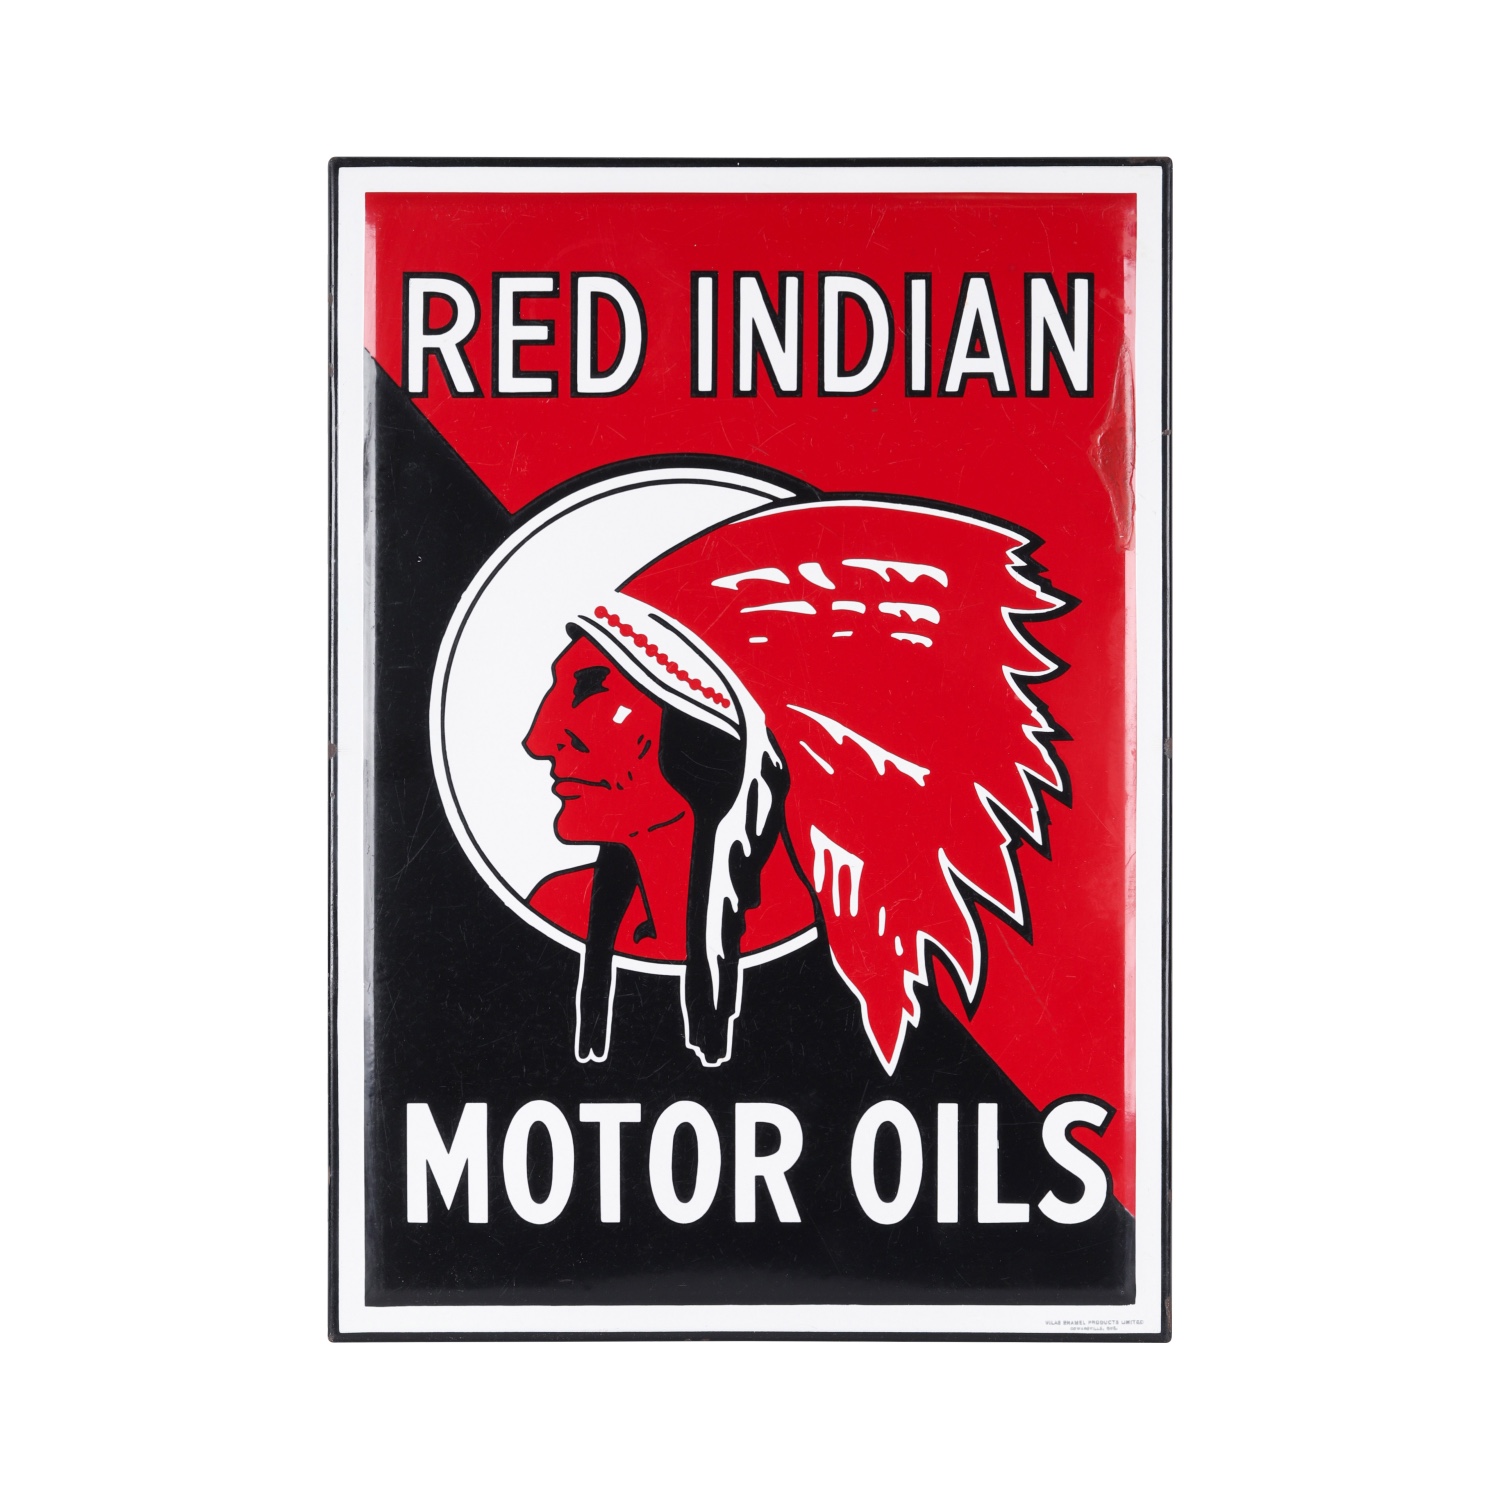 Red Indian Motor Oils sign, which sold for CA$12,000 ($10,905 with buyer’s premium) at Miller & Miller.
